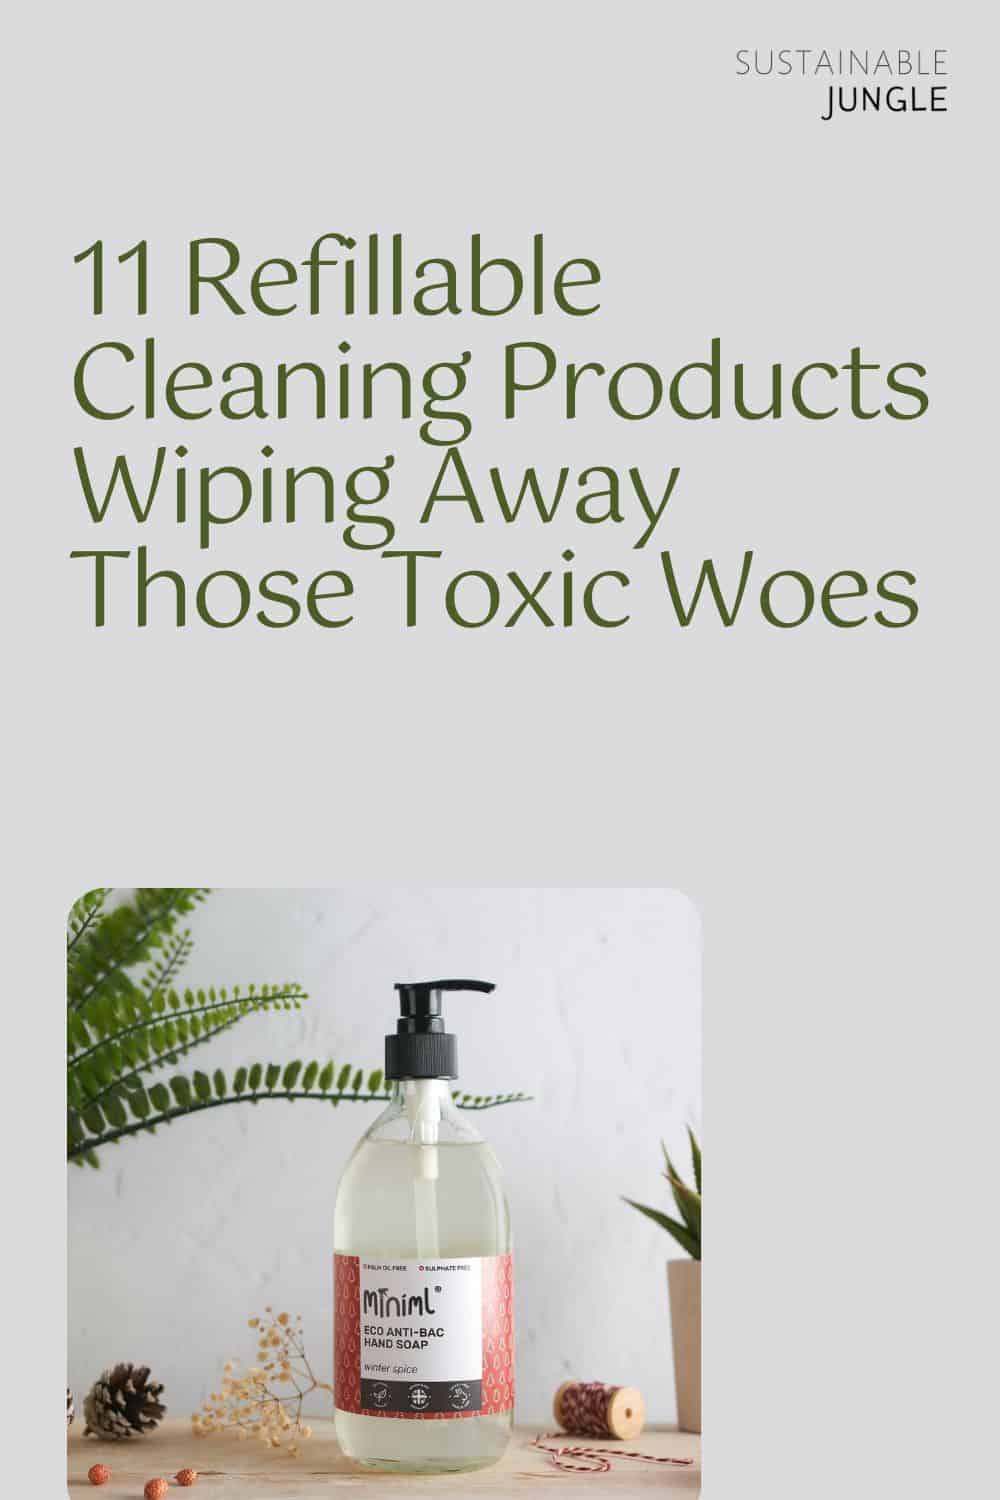 11 Refillable Cleaning Products Wiping Away Those Toxic Woes Image by Miniml Refills #refillablecleaningproducts #bestrefillablecleaningproducts #refillableglasscleaningproducts #ecofriendlyrefillablecleaningproducts #sustainablerefillablecleaningproducts #sustainablejungle